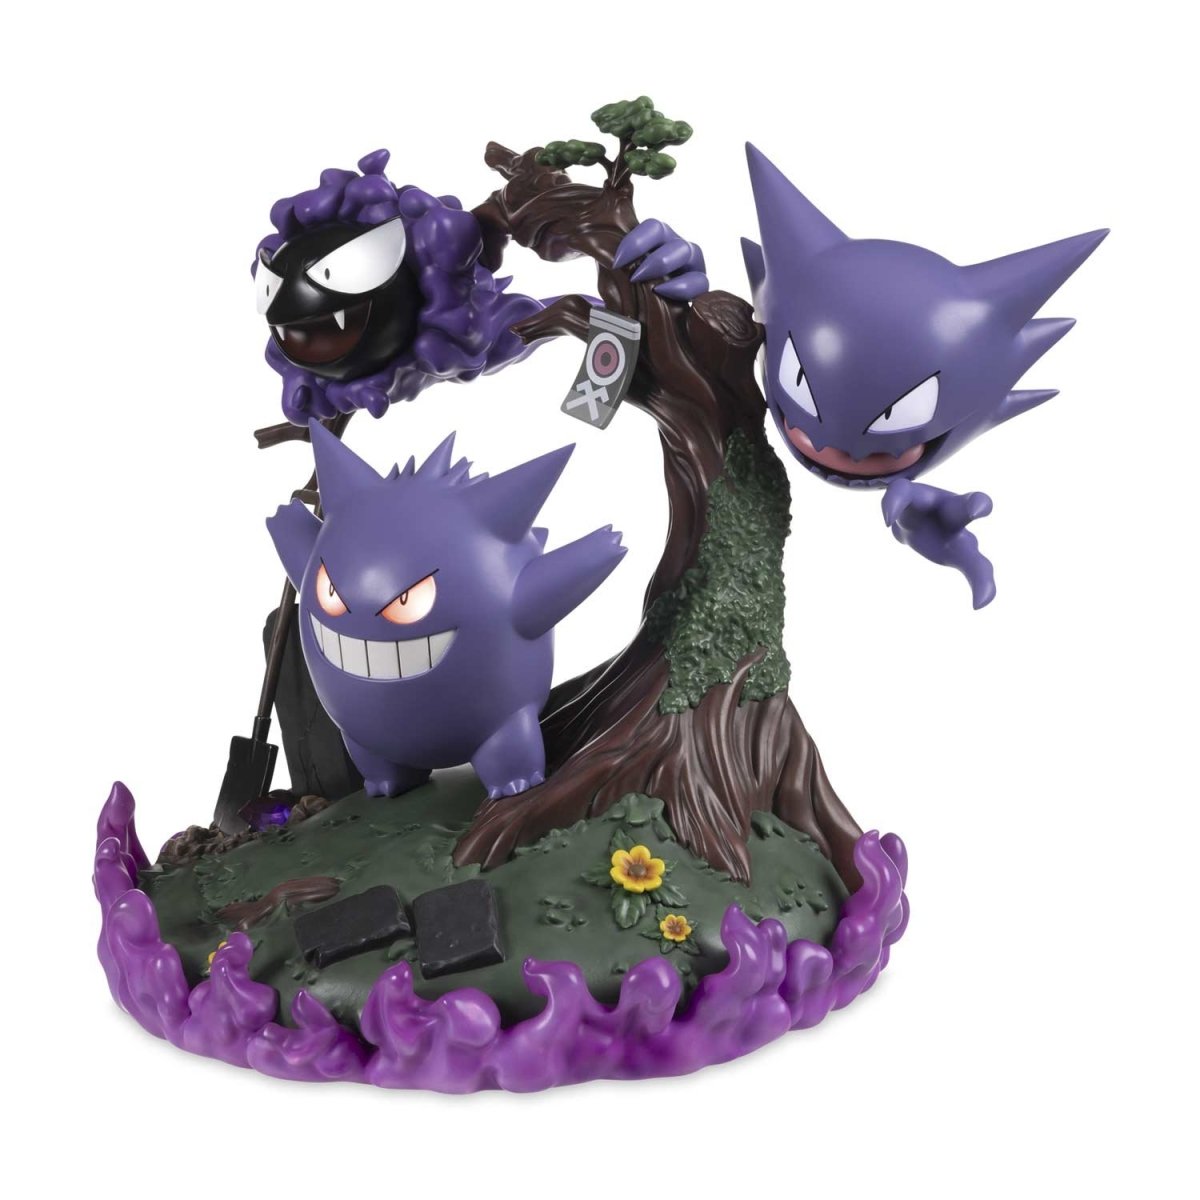 Looming Shadows Figure by First 4 Figures (1)